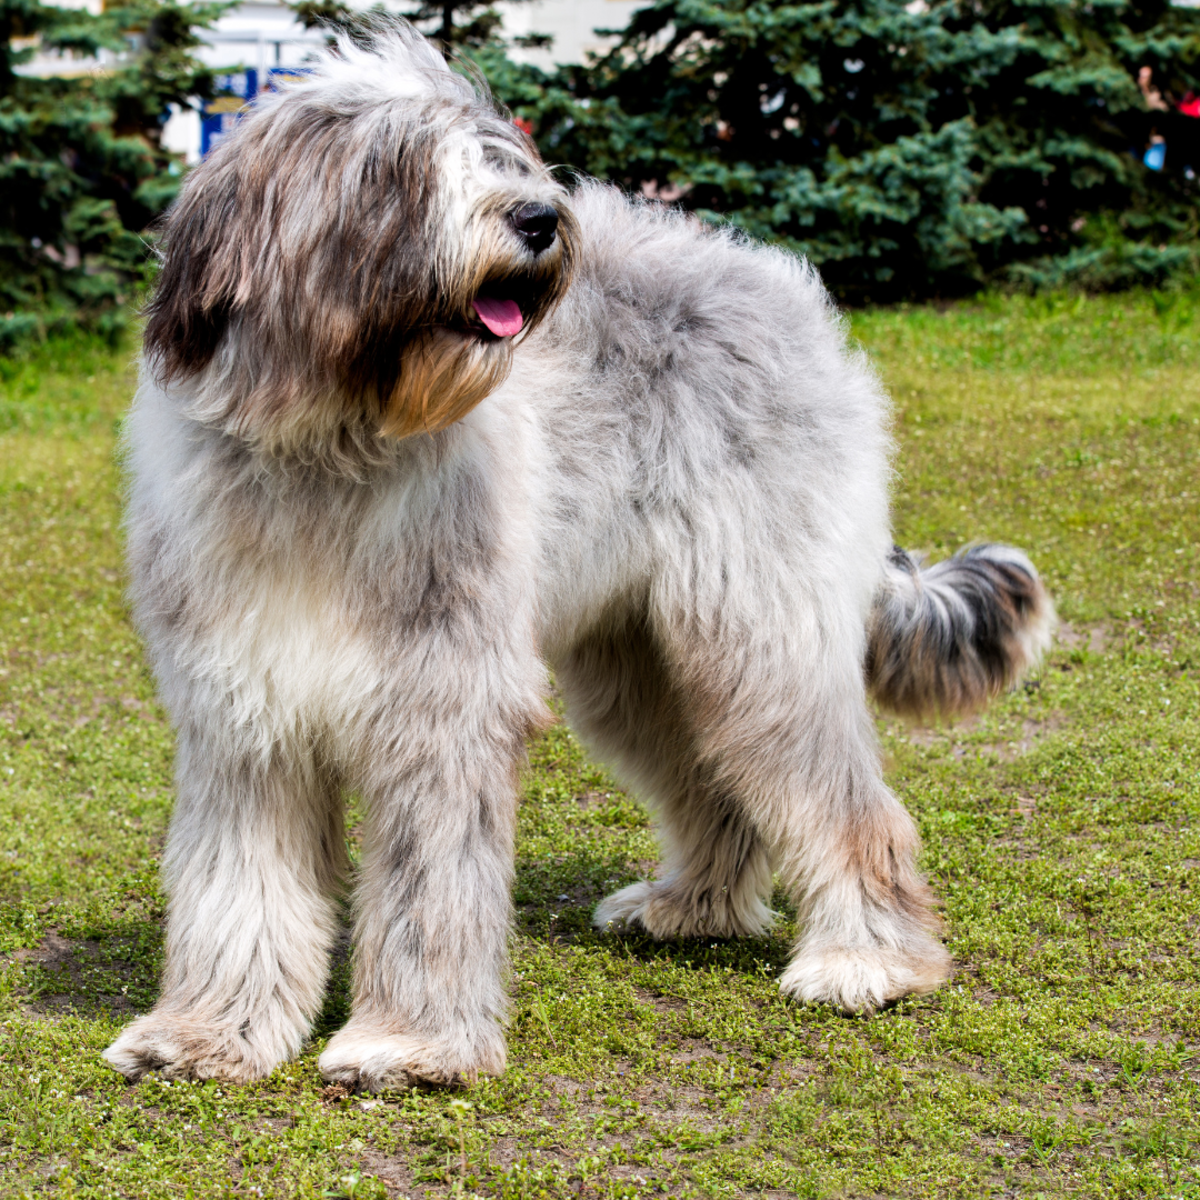 Who knew the Briard's back paws had so many toes?